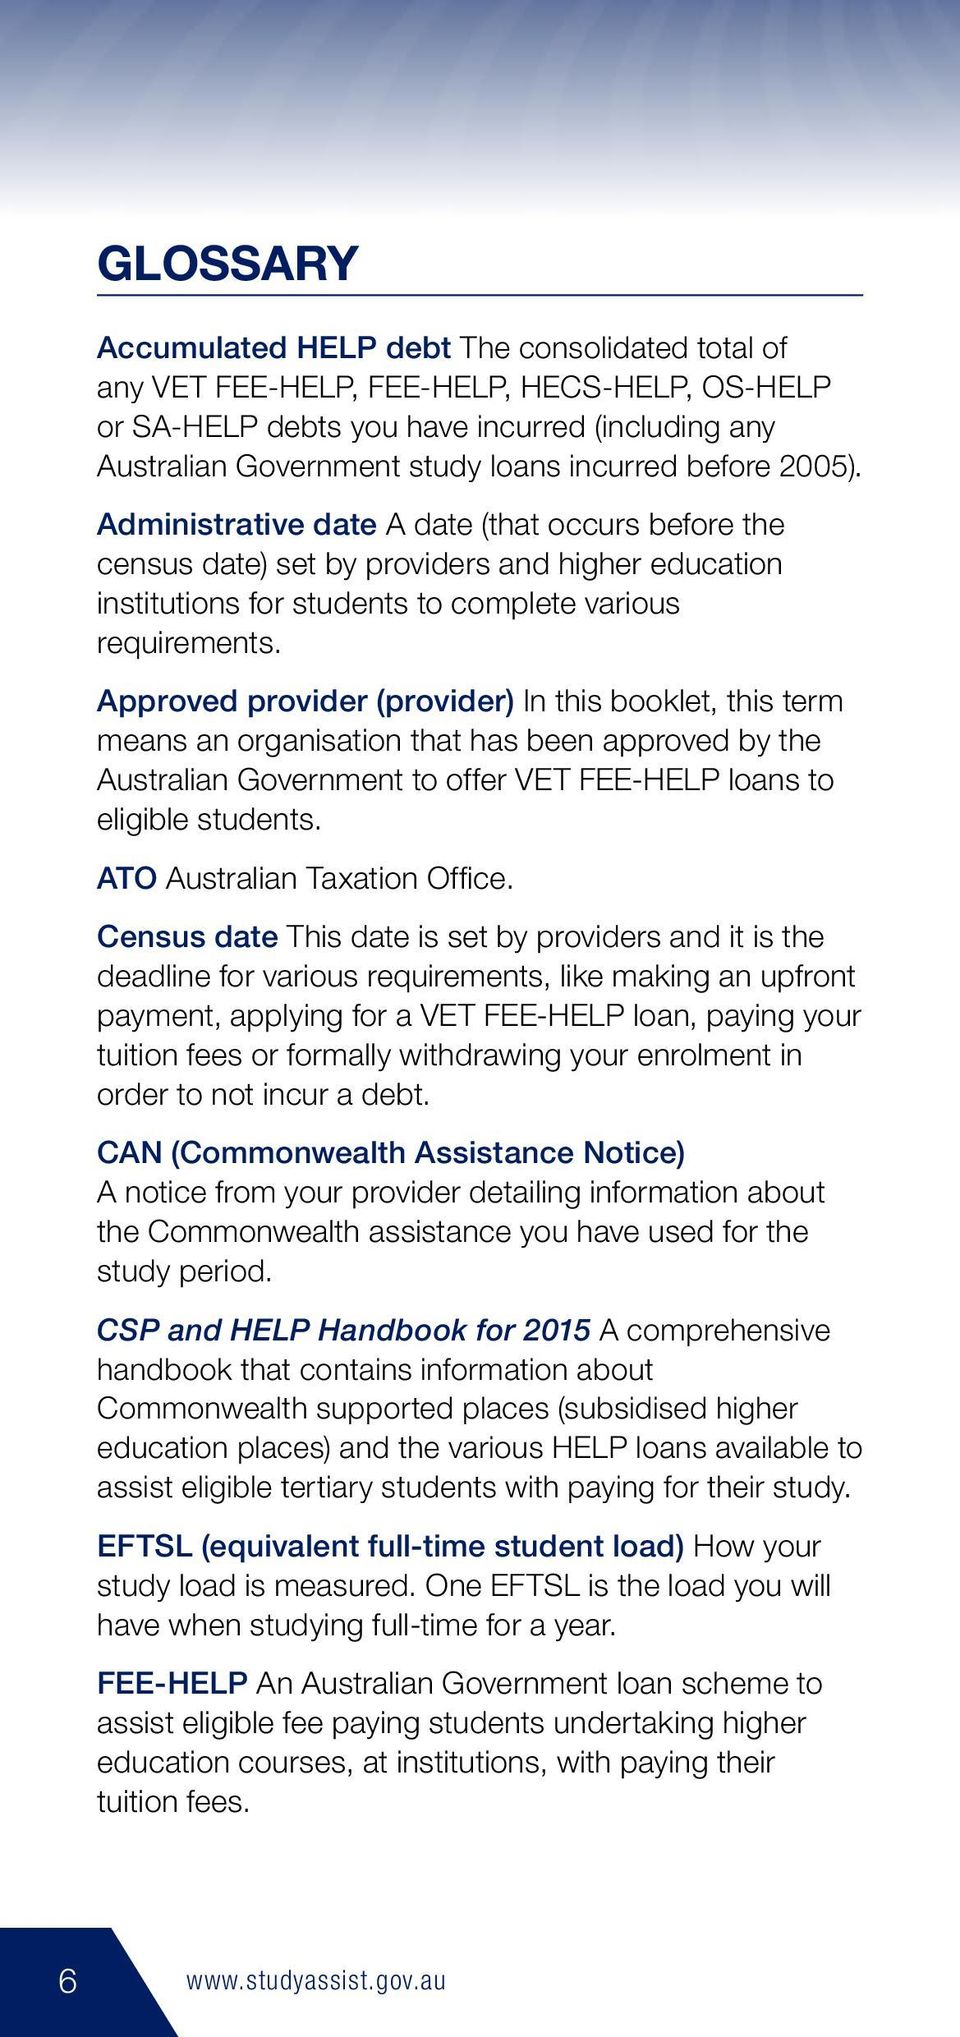 Approved provider (provider) In this booklet, this term means an organisation that has been approved by the Australian Government to offer VET FEE-HELP loans to eligible students.